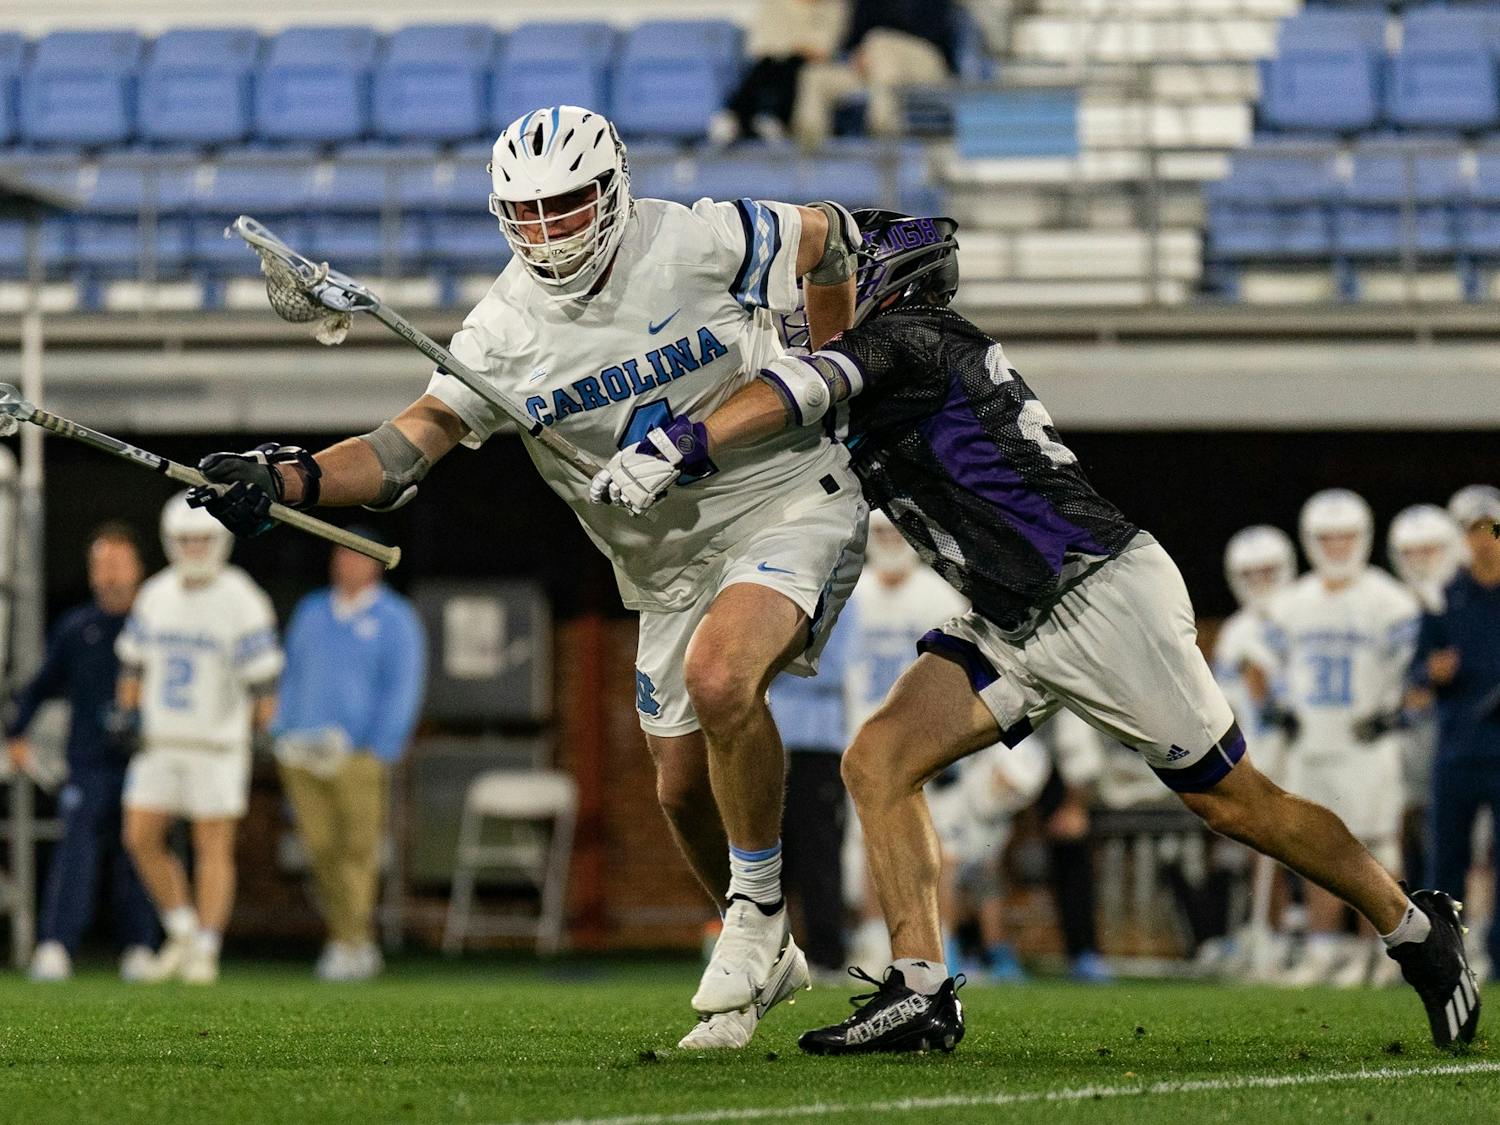 UNC graduate midfielder Harry Wellford (4) catches the ball during the men's lacrosse game against High Point on Wednesday, March 22, 2023, at Dorrance Field. UNC beat High Point 16-9.